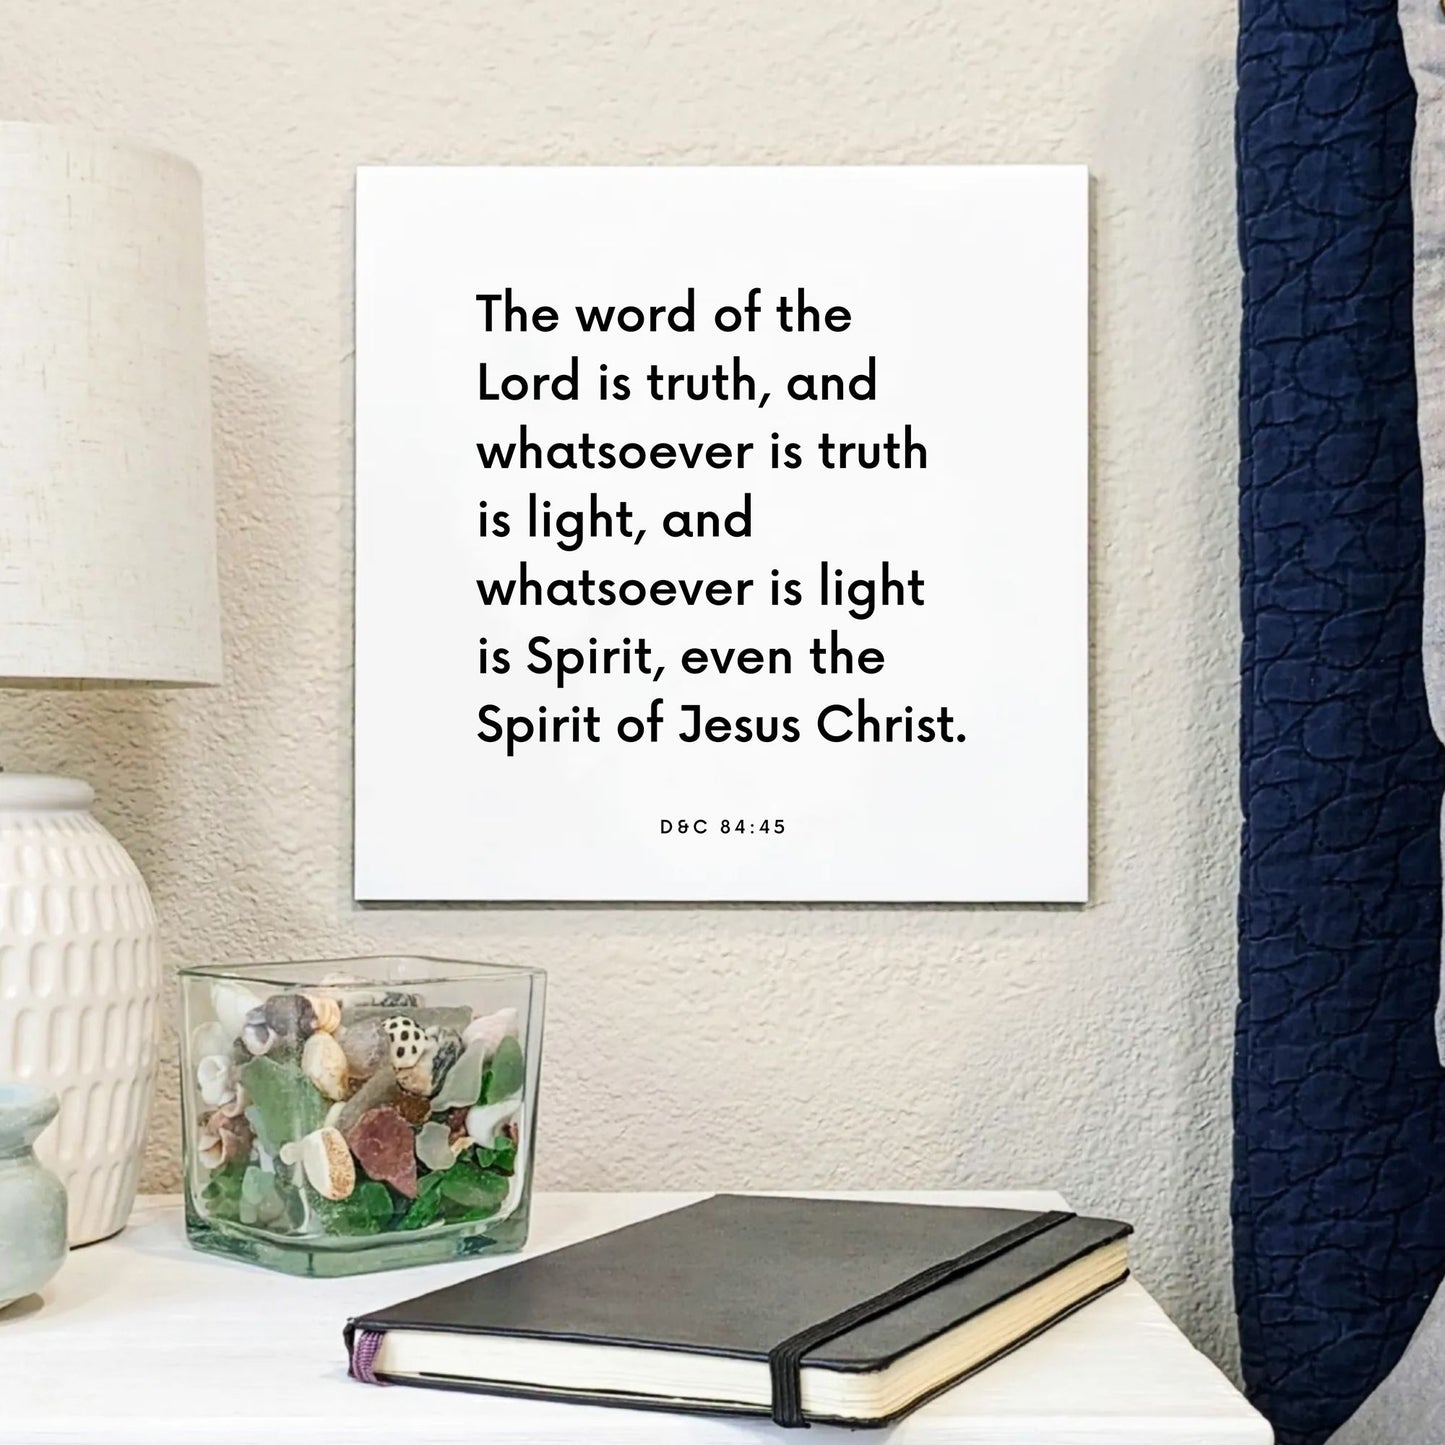 Bedside mouting of the scripture tile for D&C 84:45 - "The word of the Lord is truth"